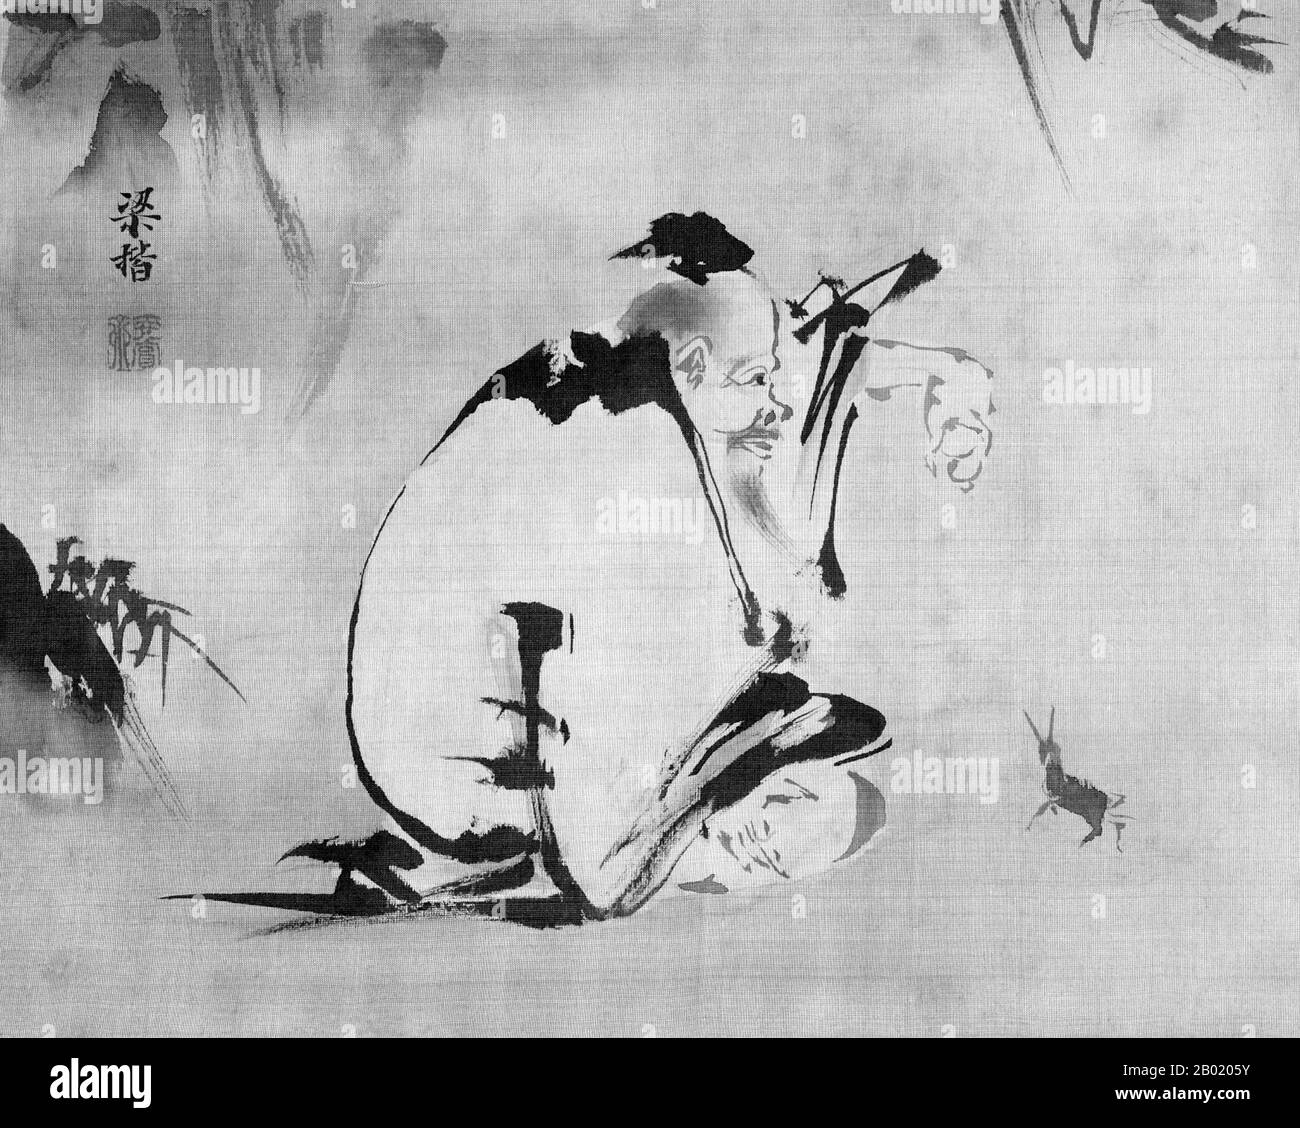 Tao te ching Black and White Stock Photos & Images - Alamy